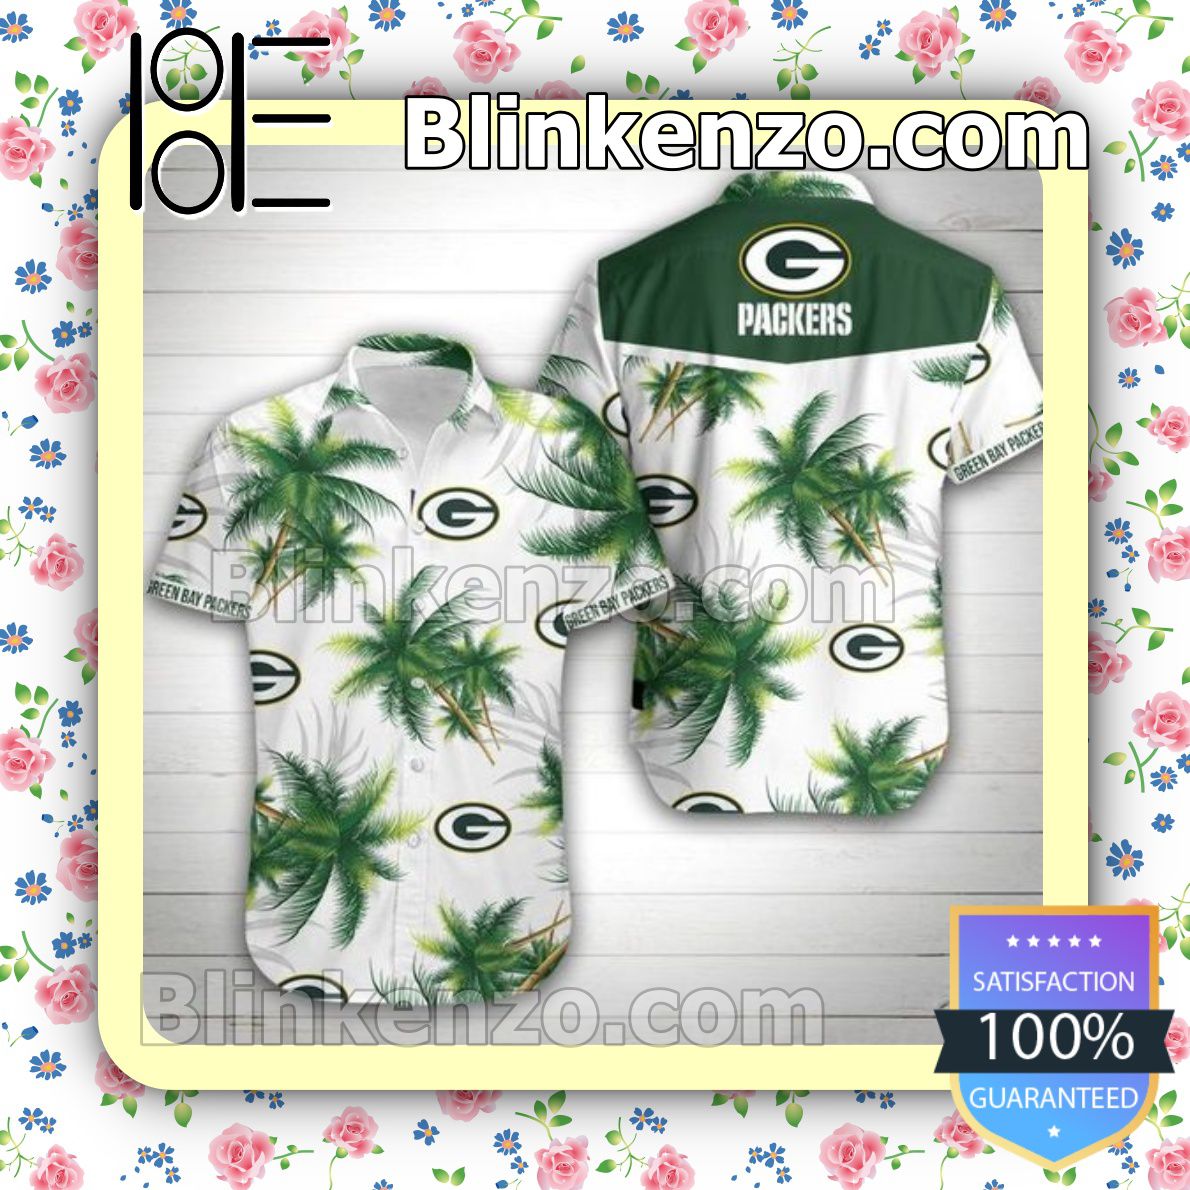 Get Here Green Bay Packers Football Palm Tree Hot Summer White Summer Shirts